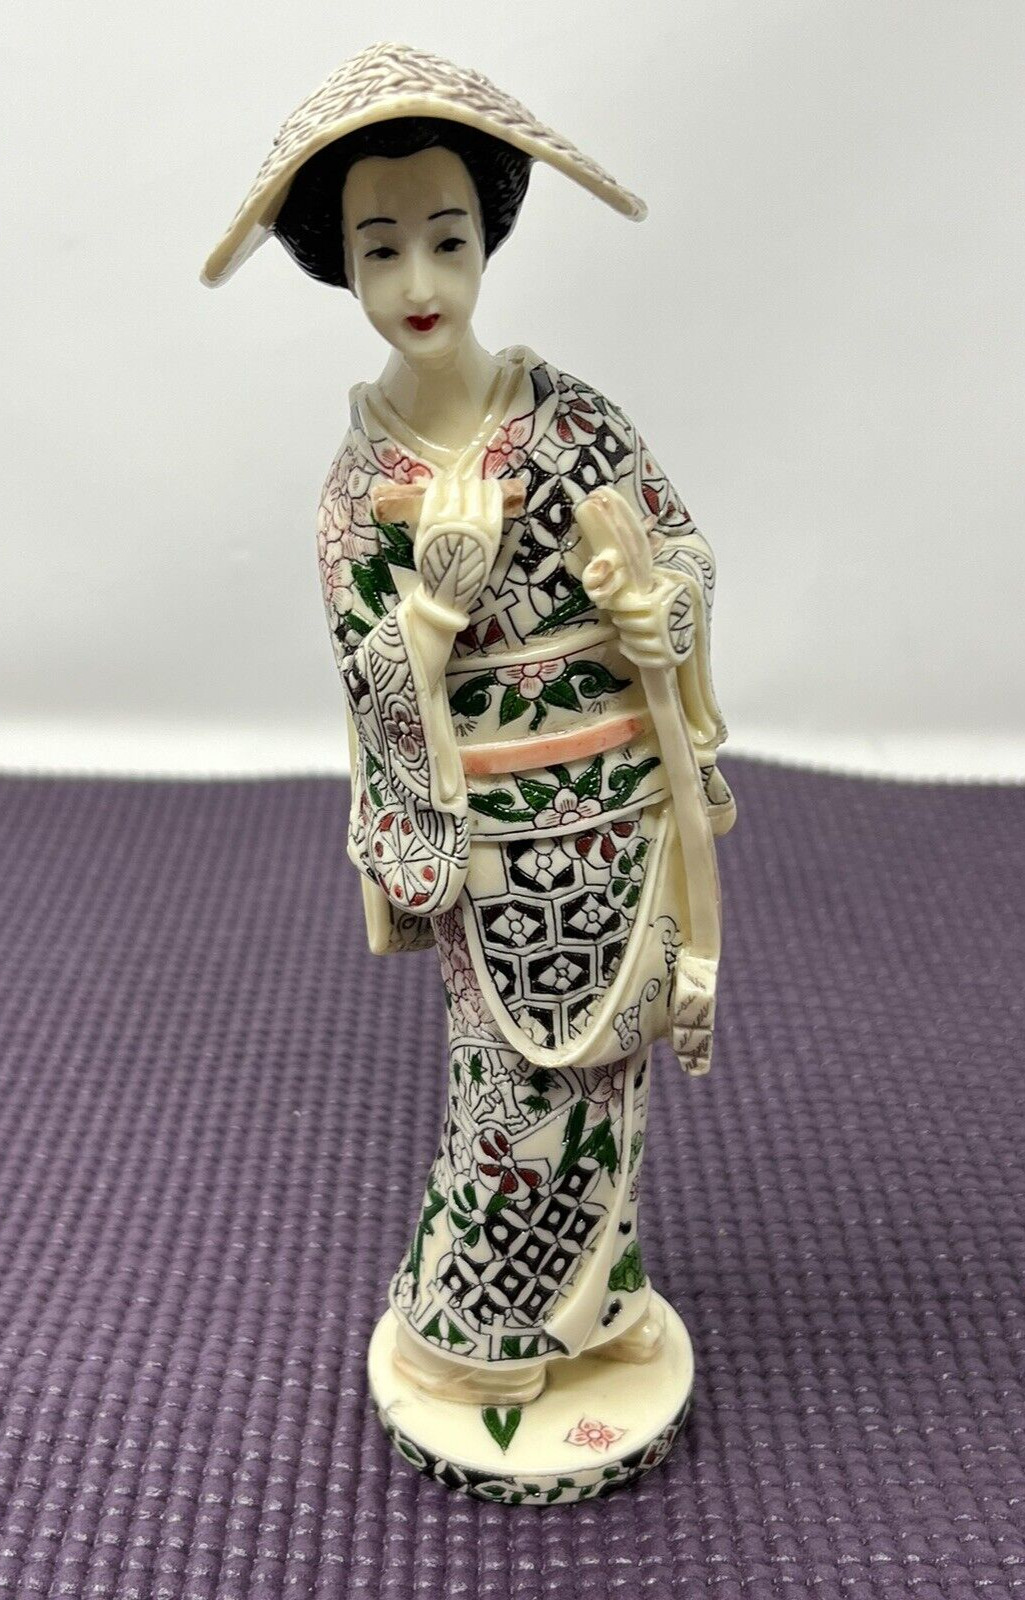 Vintage Asian Woman Figurine Holding Instrument- Resin - High Detail